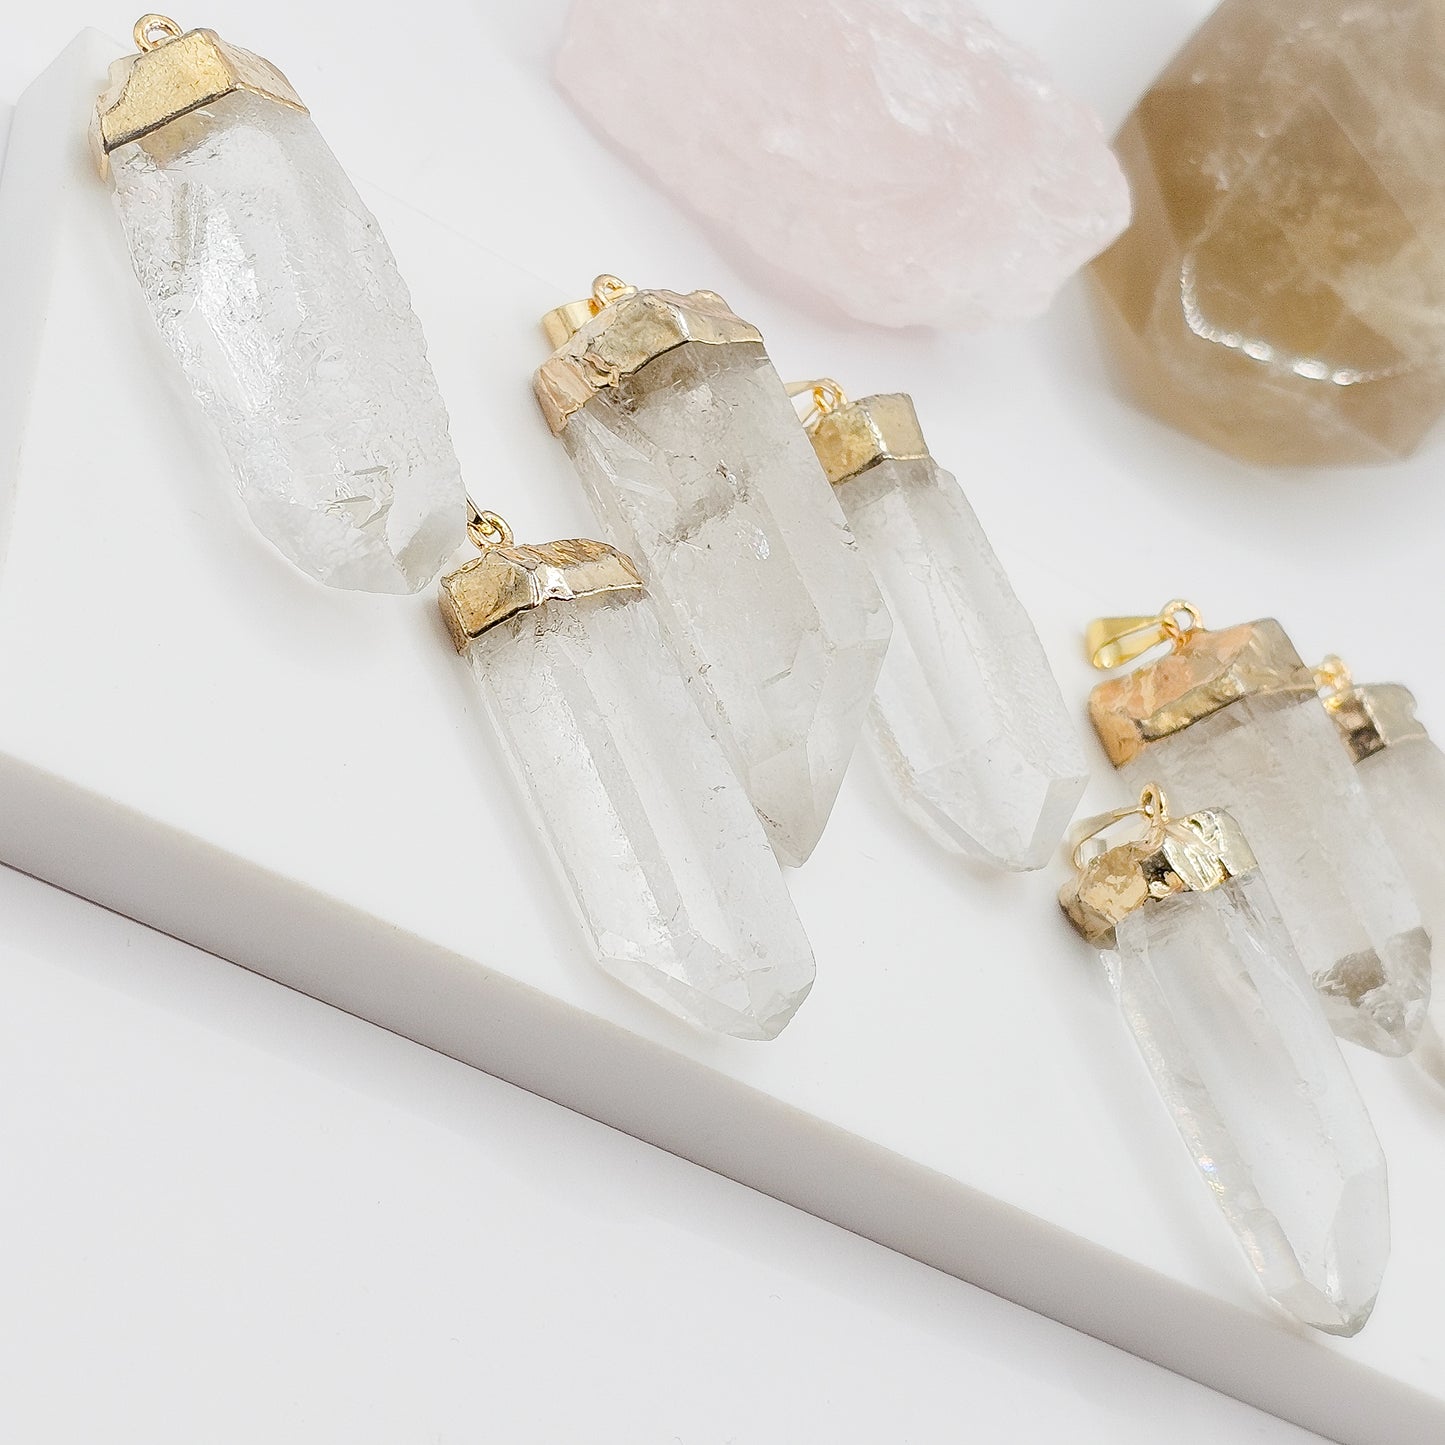 18k gold plated high quality Clear Quartz Point pendant | gemstone jewellery, xmas gift, christmas gift, gift for women, crystal gift, birthday gift, gemstone jewellery Australia, crystals Australia